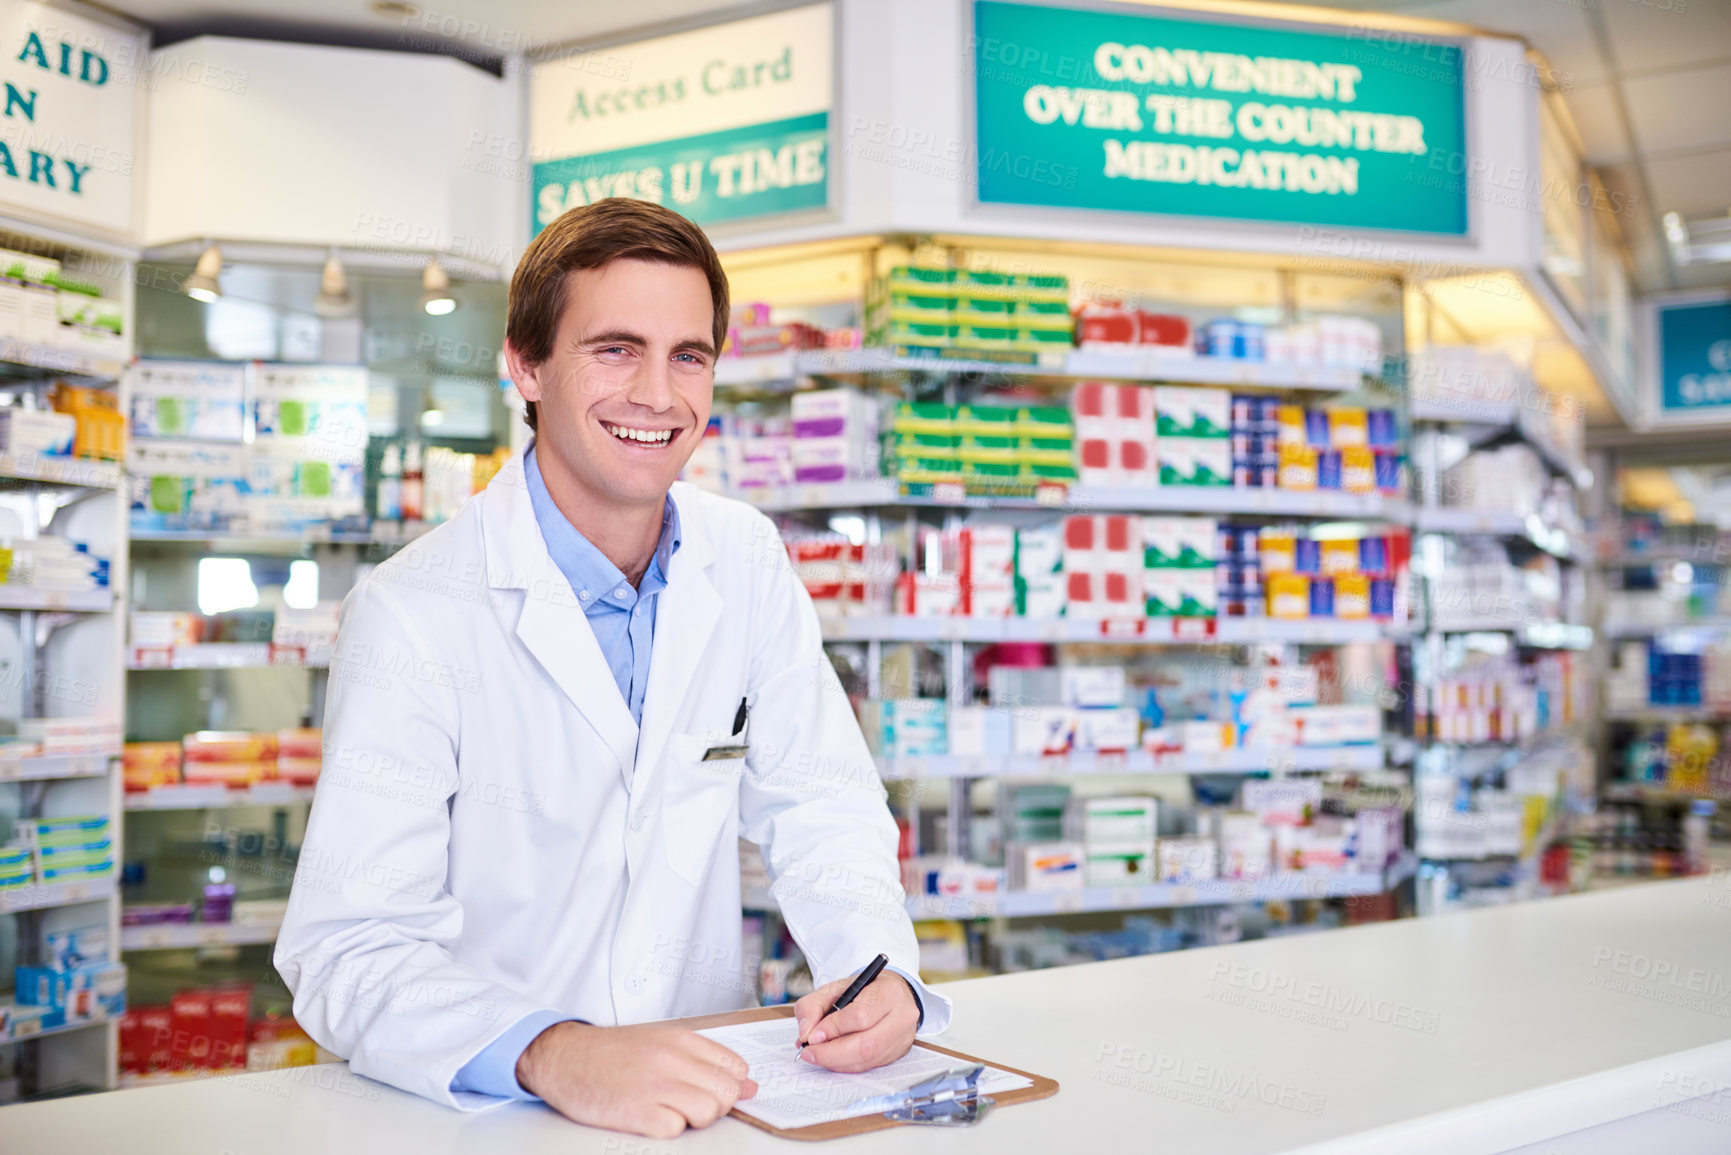 Buy stock photo Portrait of a young pharmacist writing on a clipboard in a chemist